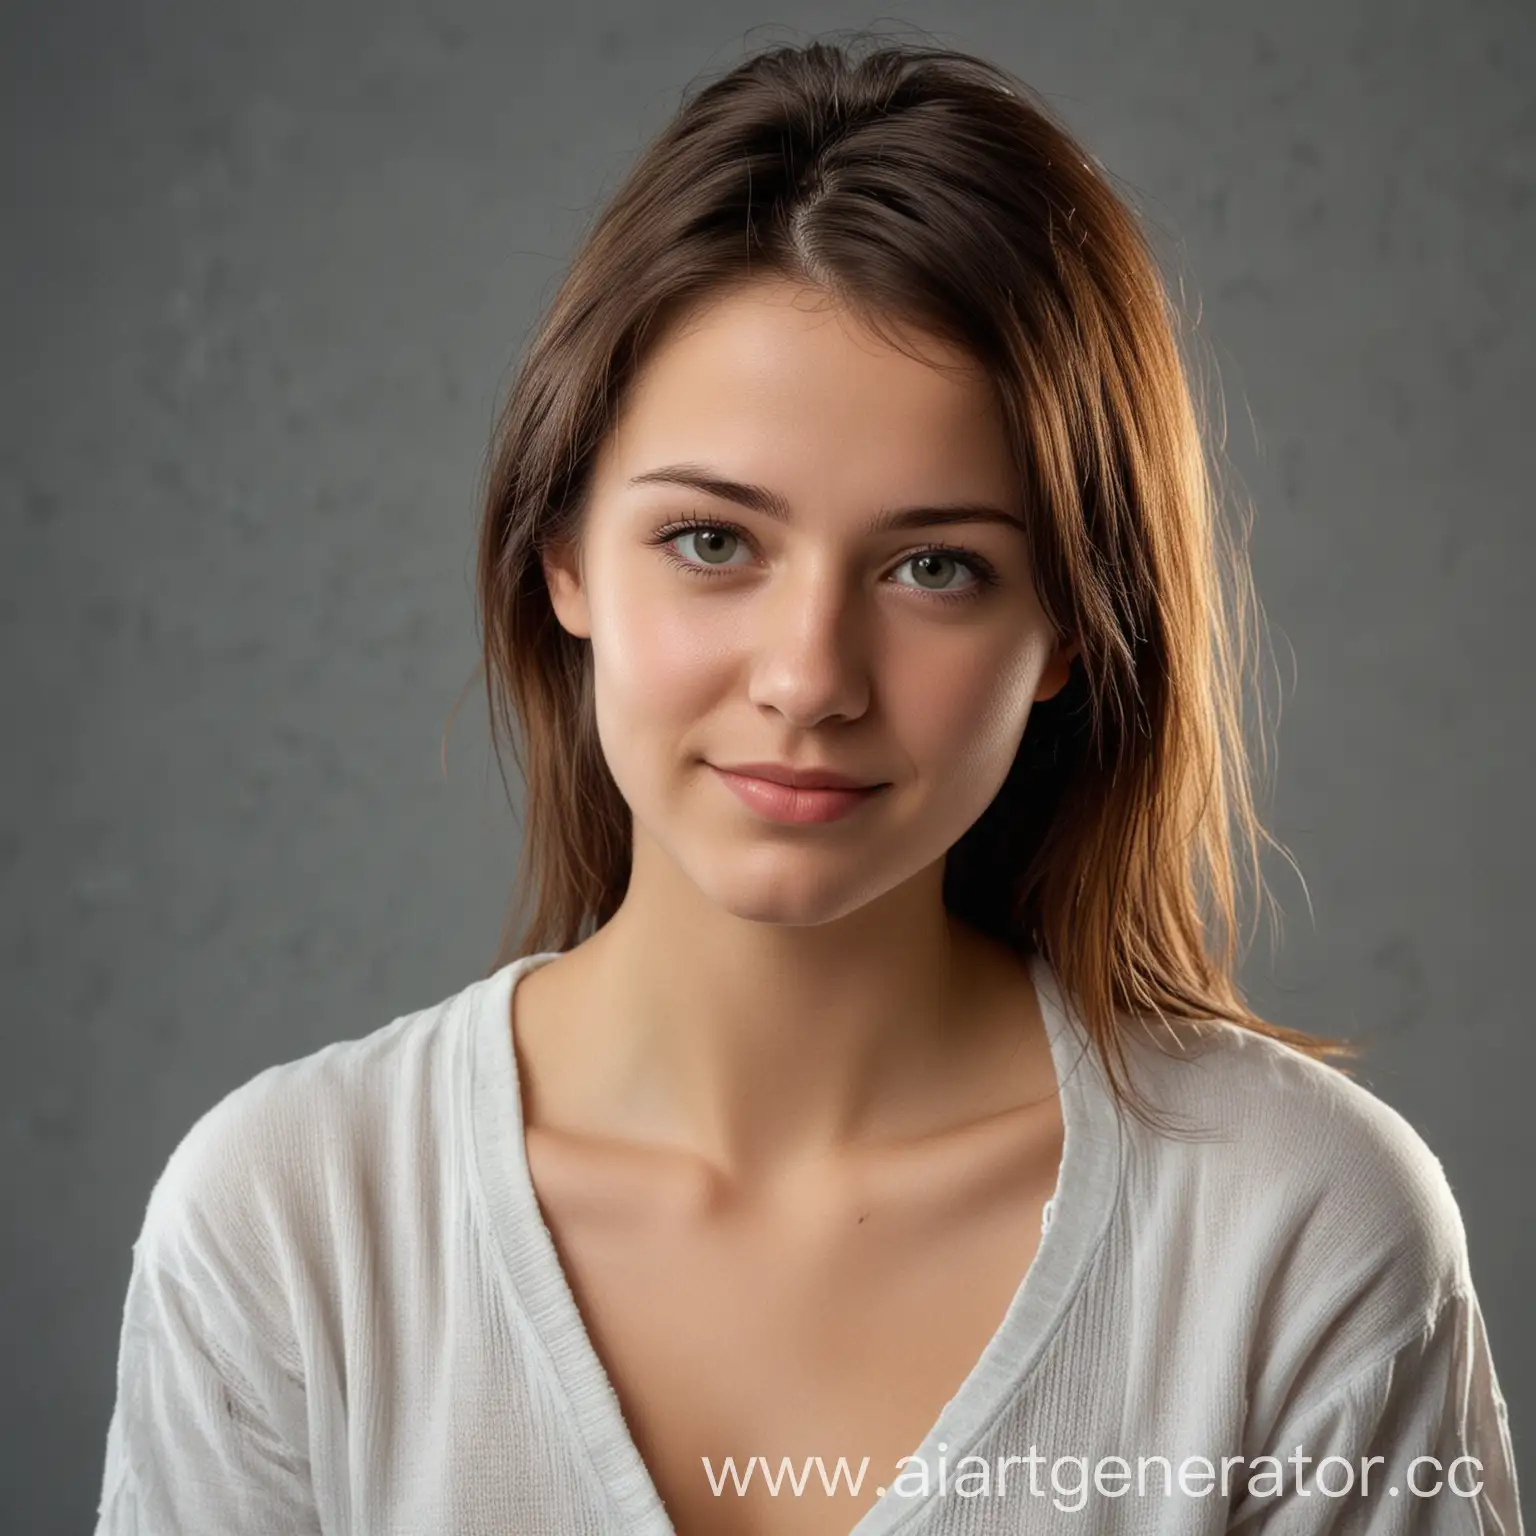 Portrait-of-a-25YearOld-Woman-with-Gentle-Expression